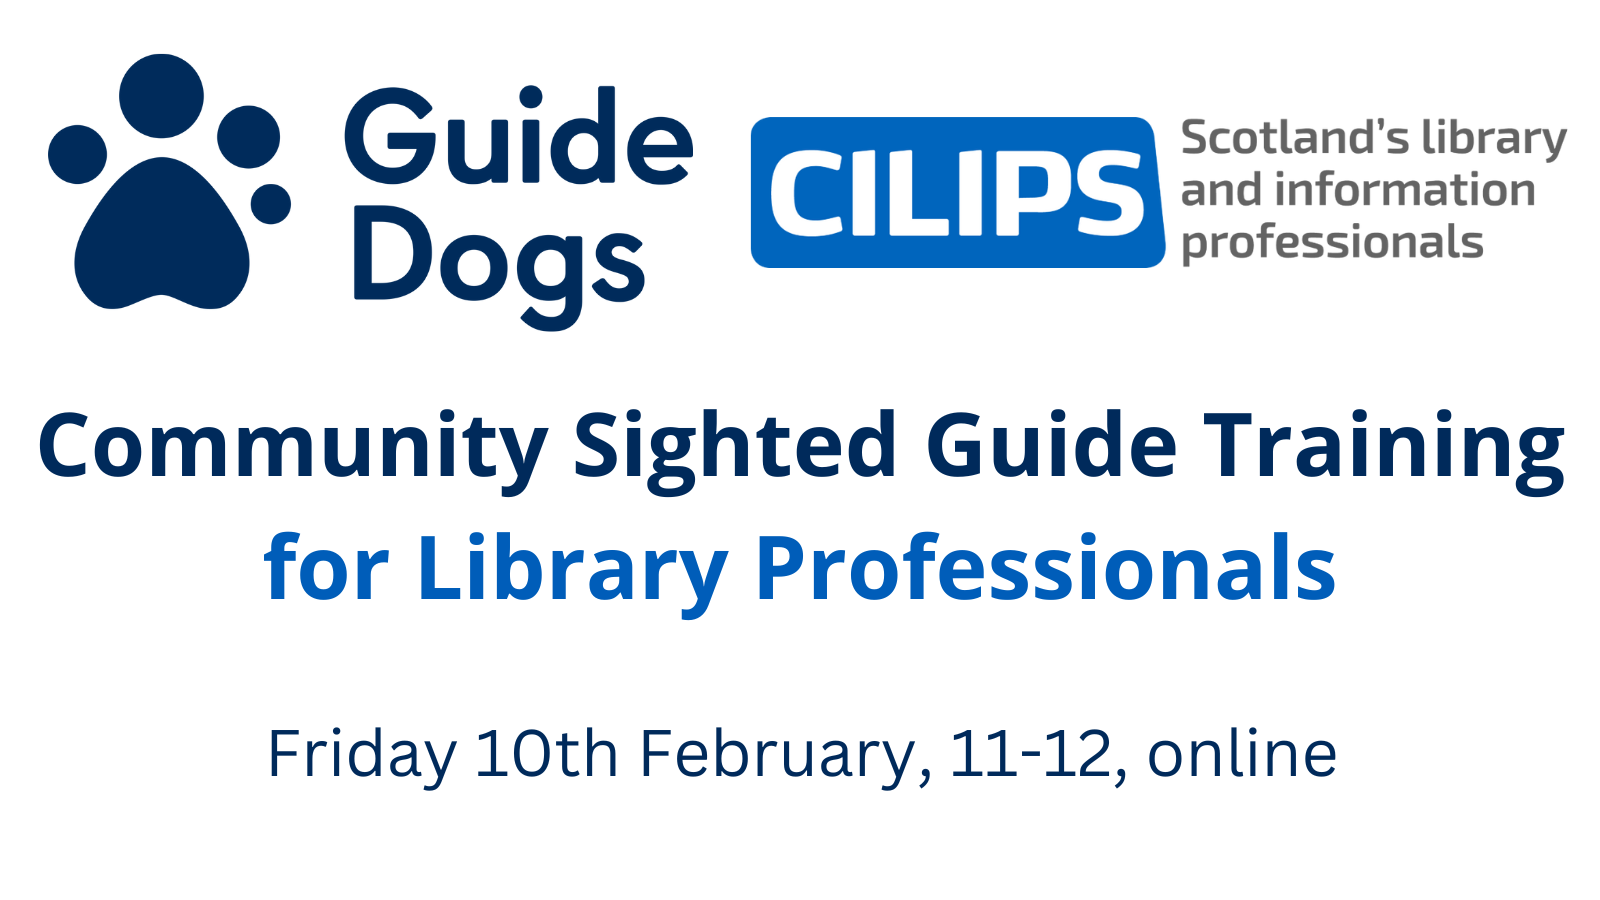 Guide Dogs x CILIPS Community Sighted Guide Training for Library Professionals. Friday 10th February, 10-11, online. With blue and navy text on a white background.